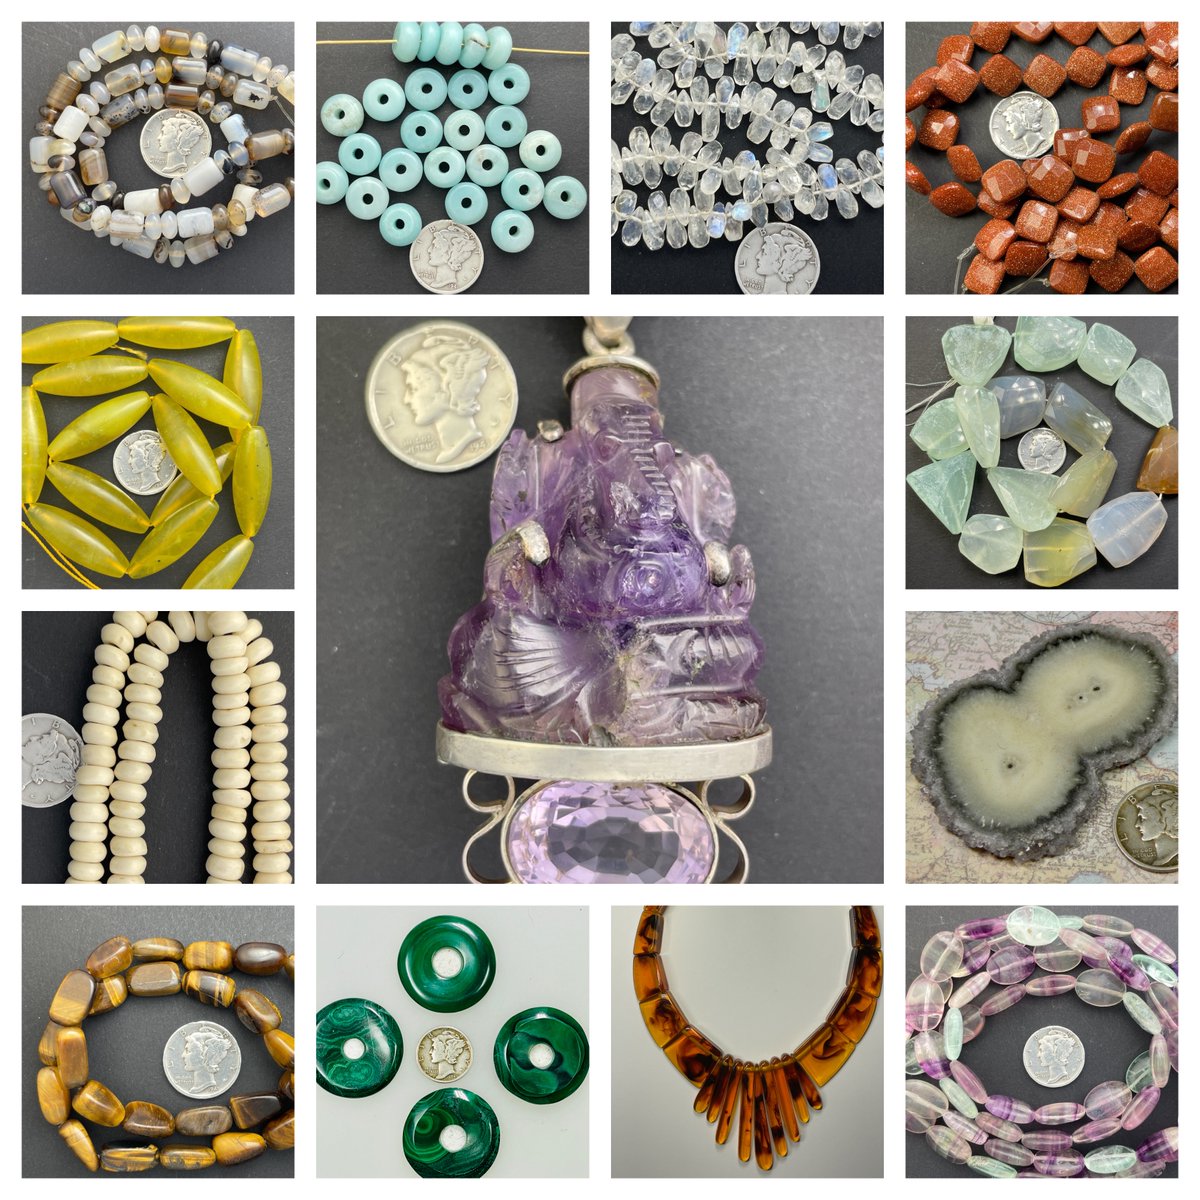 @guybead I will be posting some yummy stone beads tomorrow, starting at 11am. on our Wild Things Beads Destash Group on facebook. Hope you can join us.